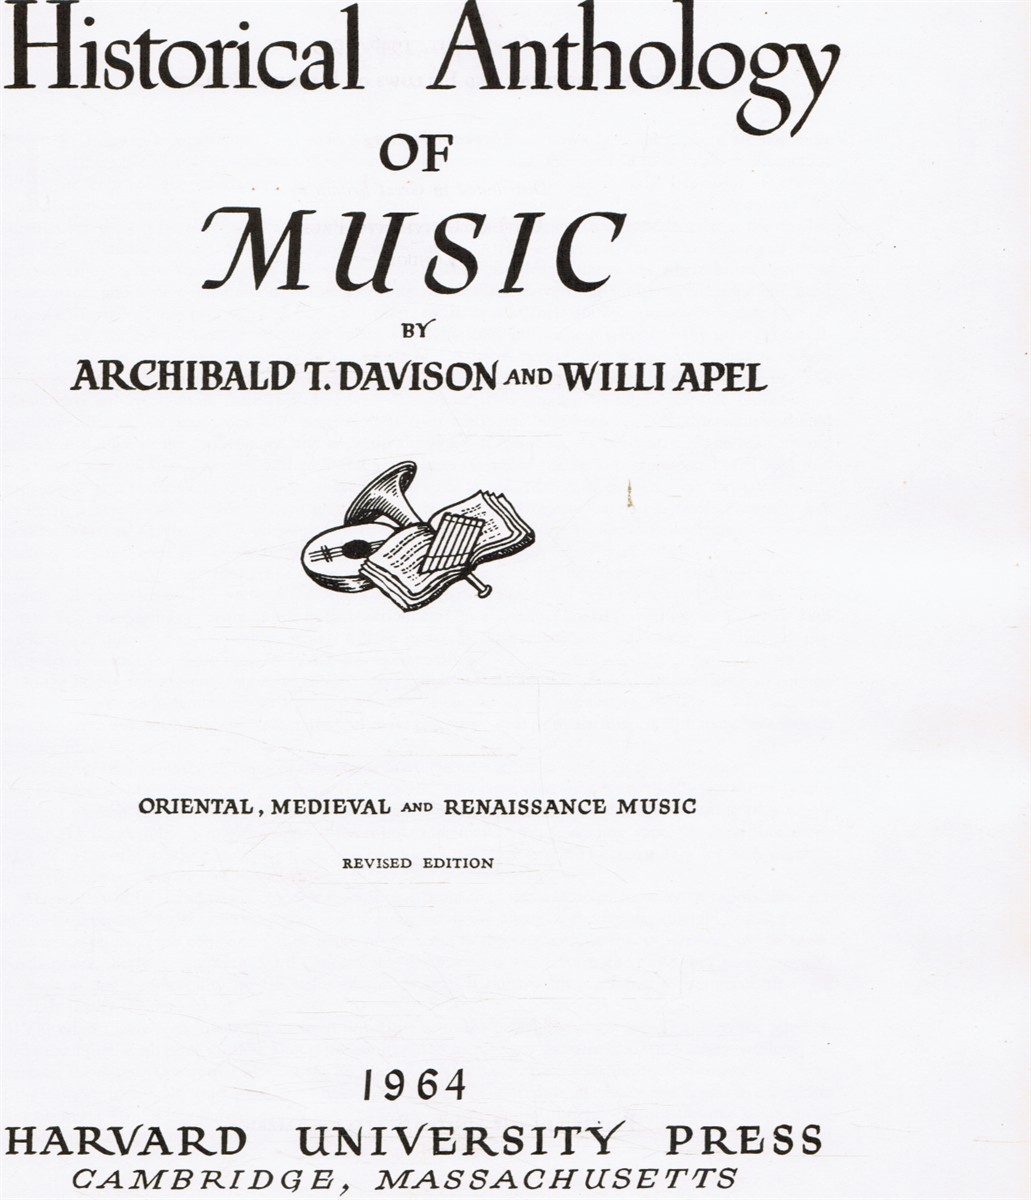 DAVISON, ARCHIBALD T. AND WILLI APEL - Historical Anthology of Music: Oriental, Medieval and Renaissance Music